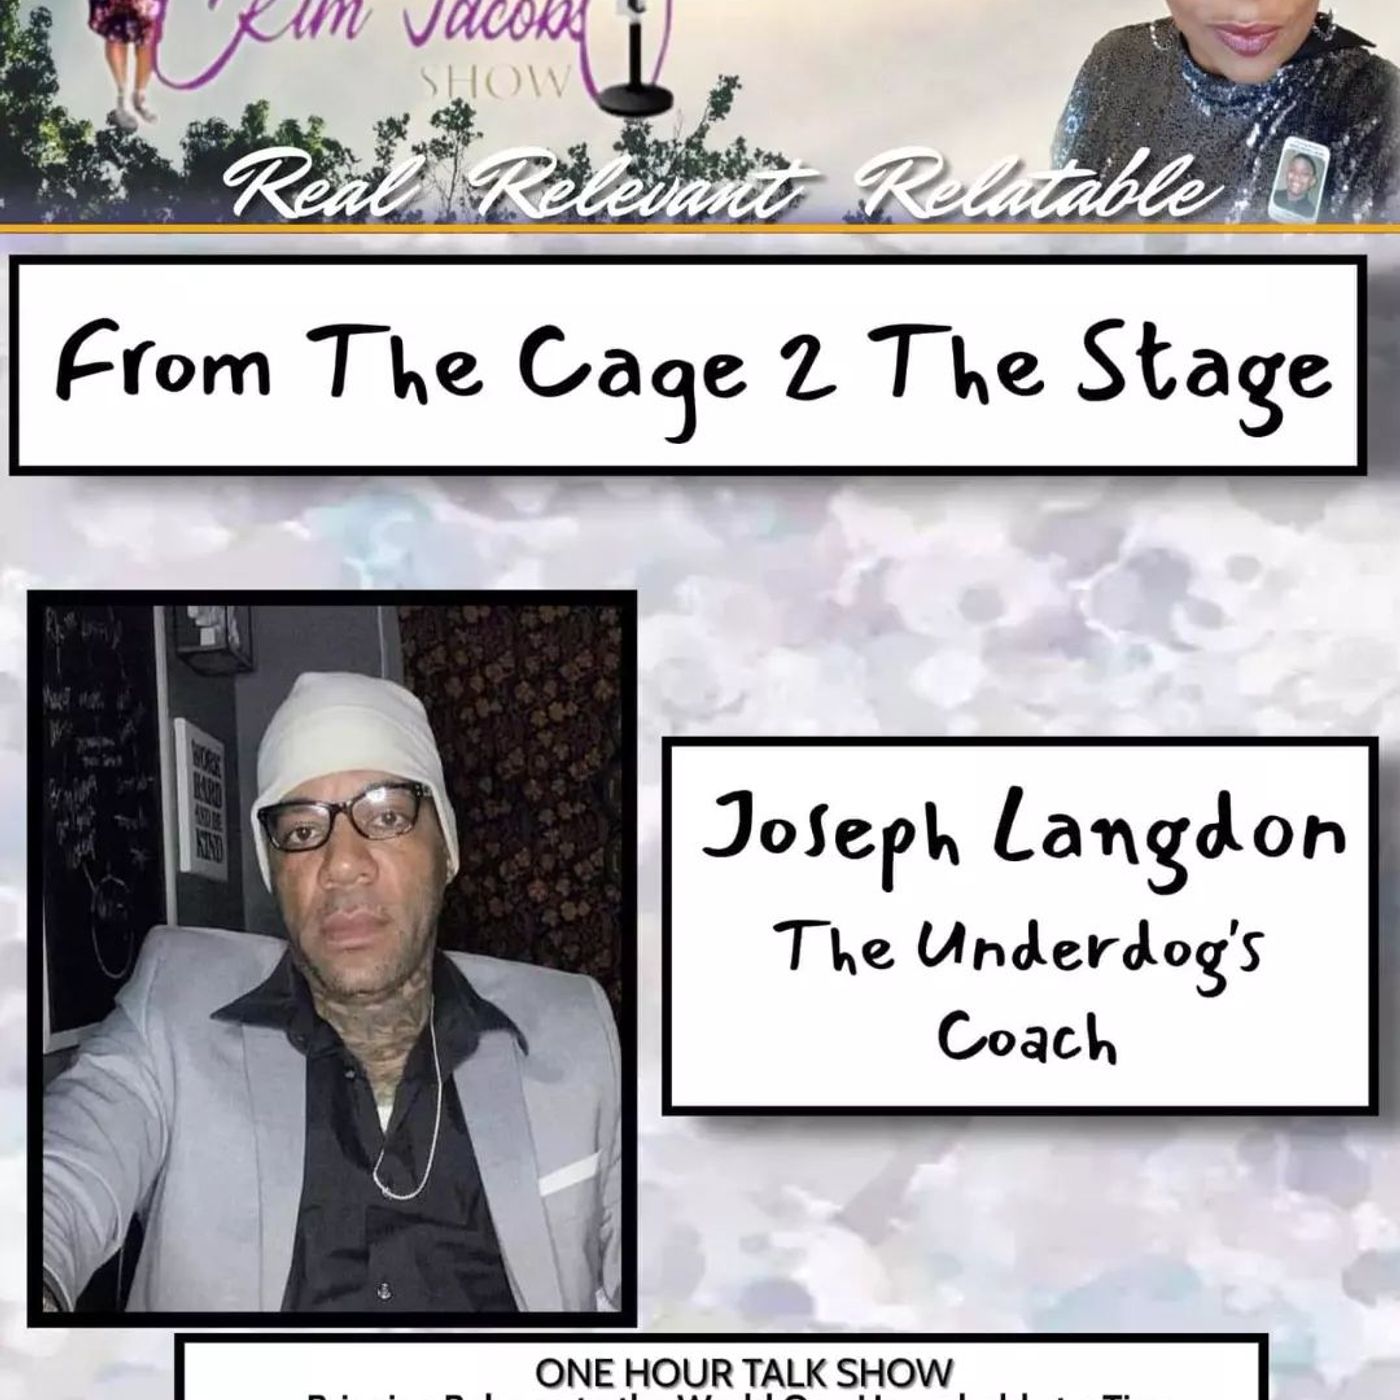 FROM THE CAGE 2 TO THE STAGE_ JOSEPH LANDON’S STORY